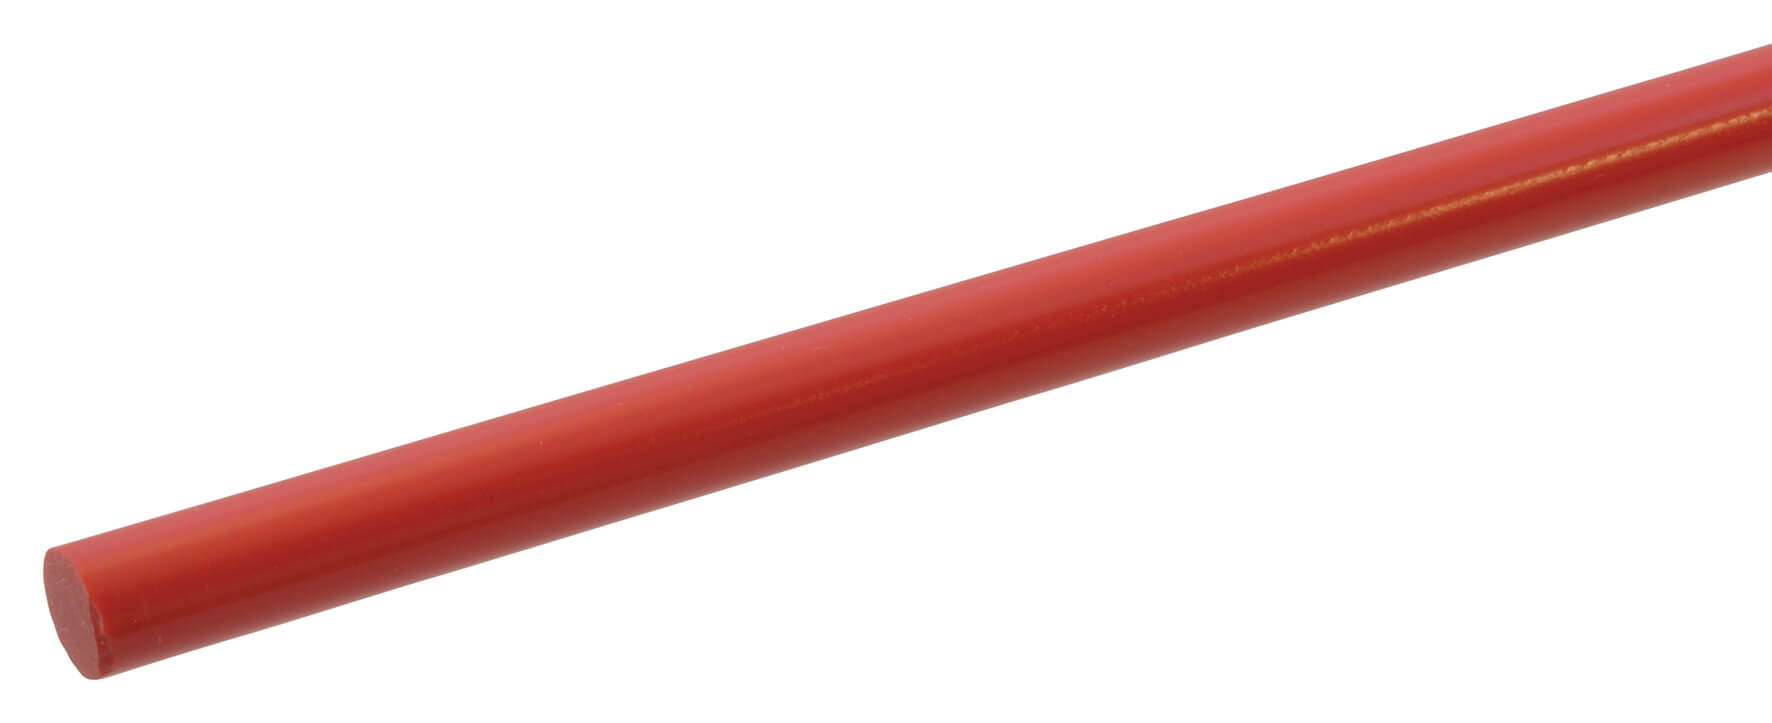 Acrylic Rod 4.8mm x 610mm  - Solid Red